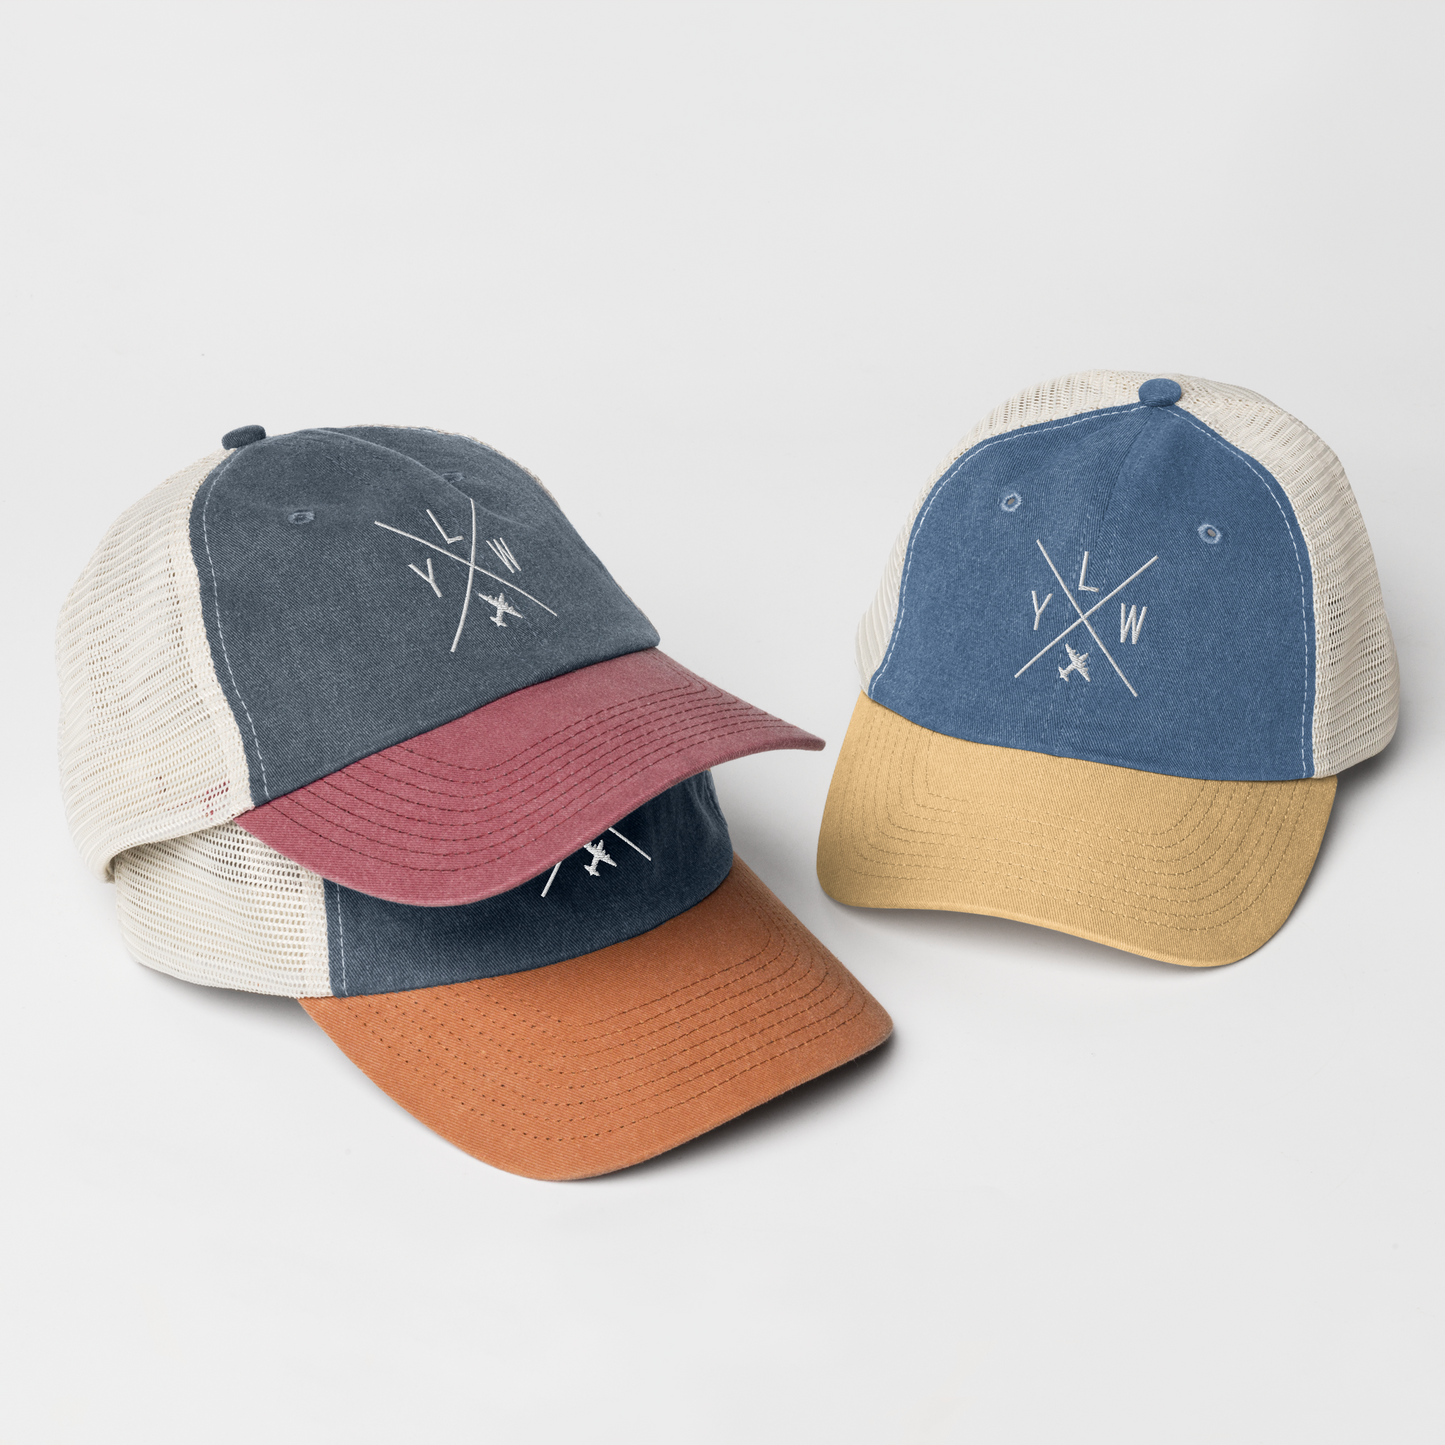 YHM Designs - YLW Kelowna Pigment-Dyed Trucker Cap - Crossed-X Design with Airport Code and Vintage Propliner - White Embroidery - Image 05